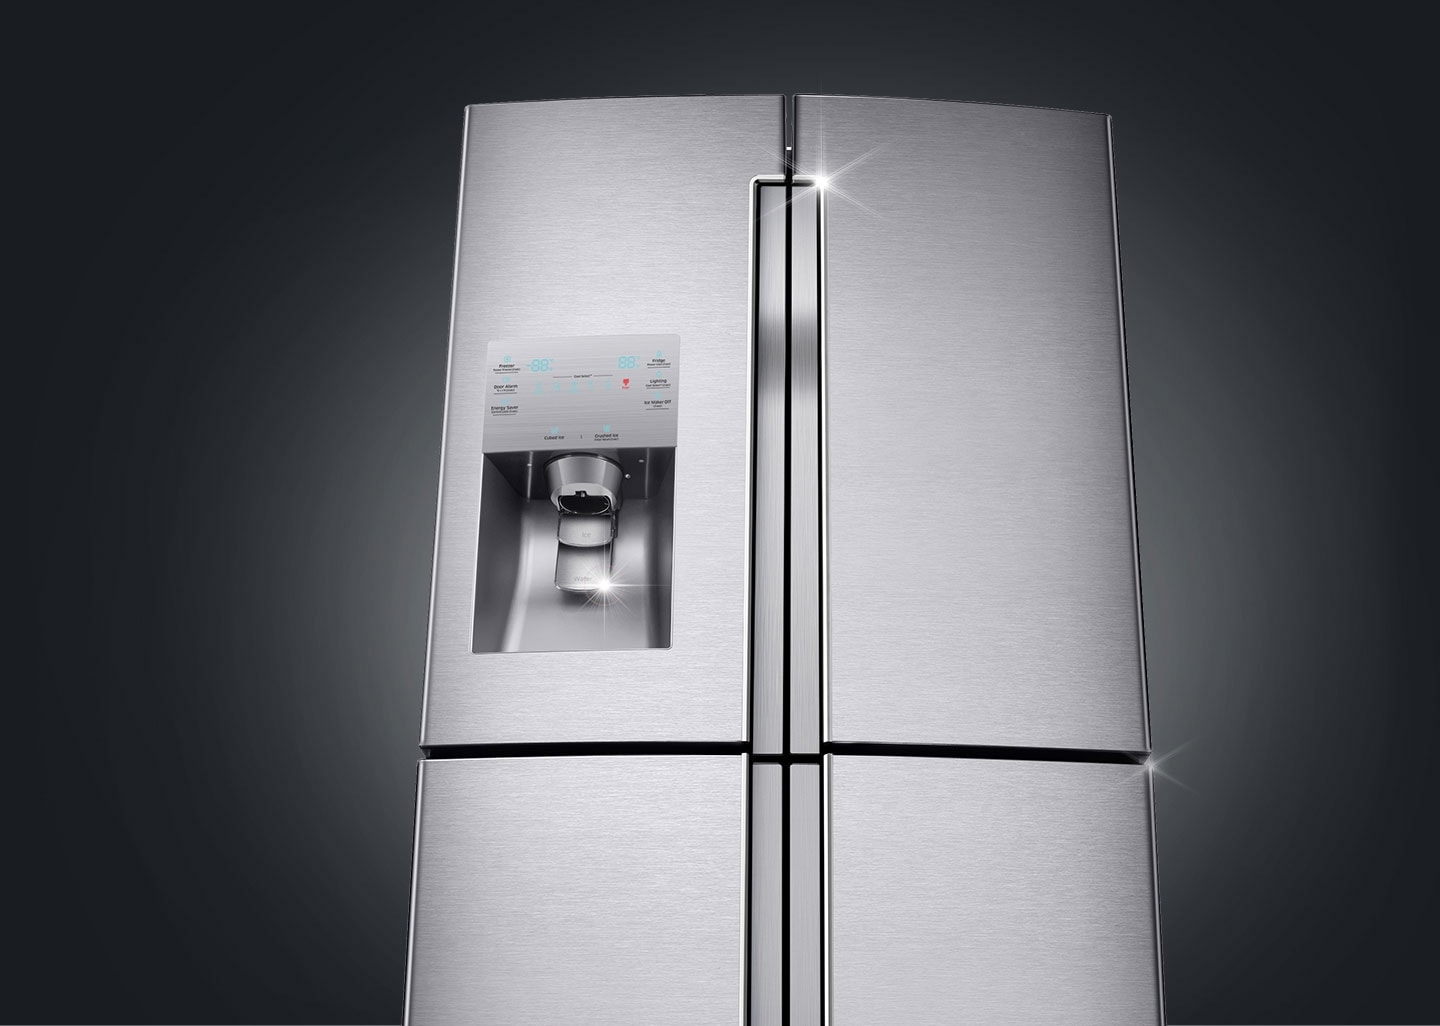 Perfect Refrigerators with metal body and Recessed handles